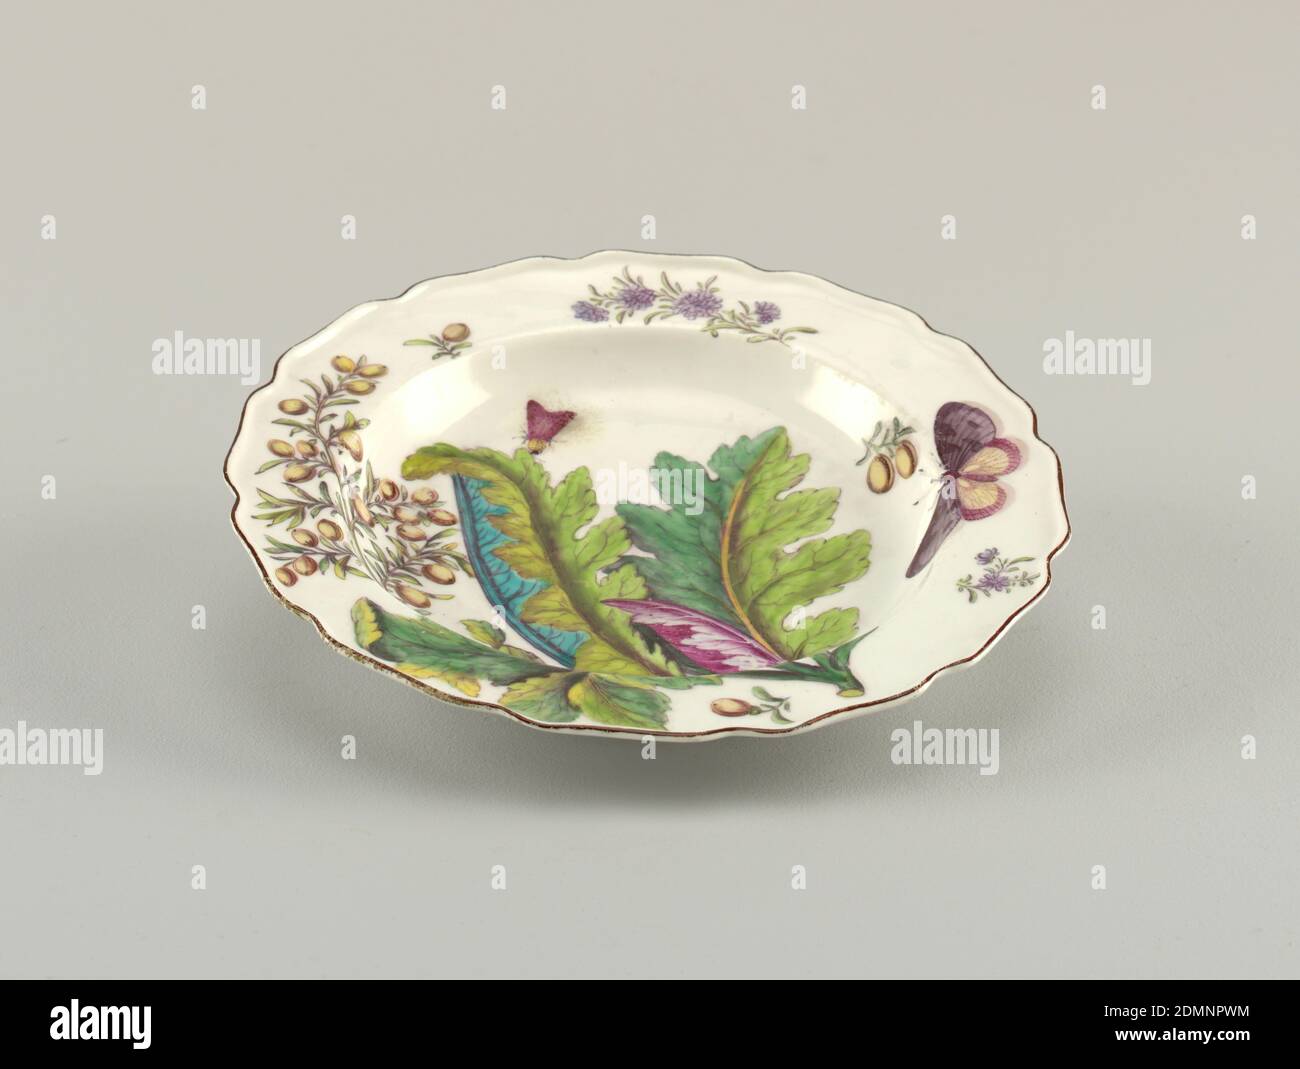 Hans Sloane' Plate, Chelsea Porcelain Manufactory, English, established ca. 1743/45, Georg Dionysius Ehret, German, 1708 - 1770, soft paste porcelain, vitreous enamel, A plate with a wavy, brown-edged rim painted with a branch of bocconia/parrot weed (Bocconia frutescens) leaves, various sprigs, a caterpillar, and two winged insects., England, 1753–1756, ceramics, Decorative Arts, plate, plate Stock Photo